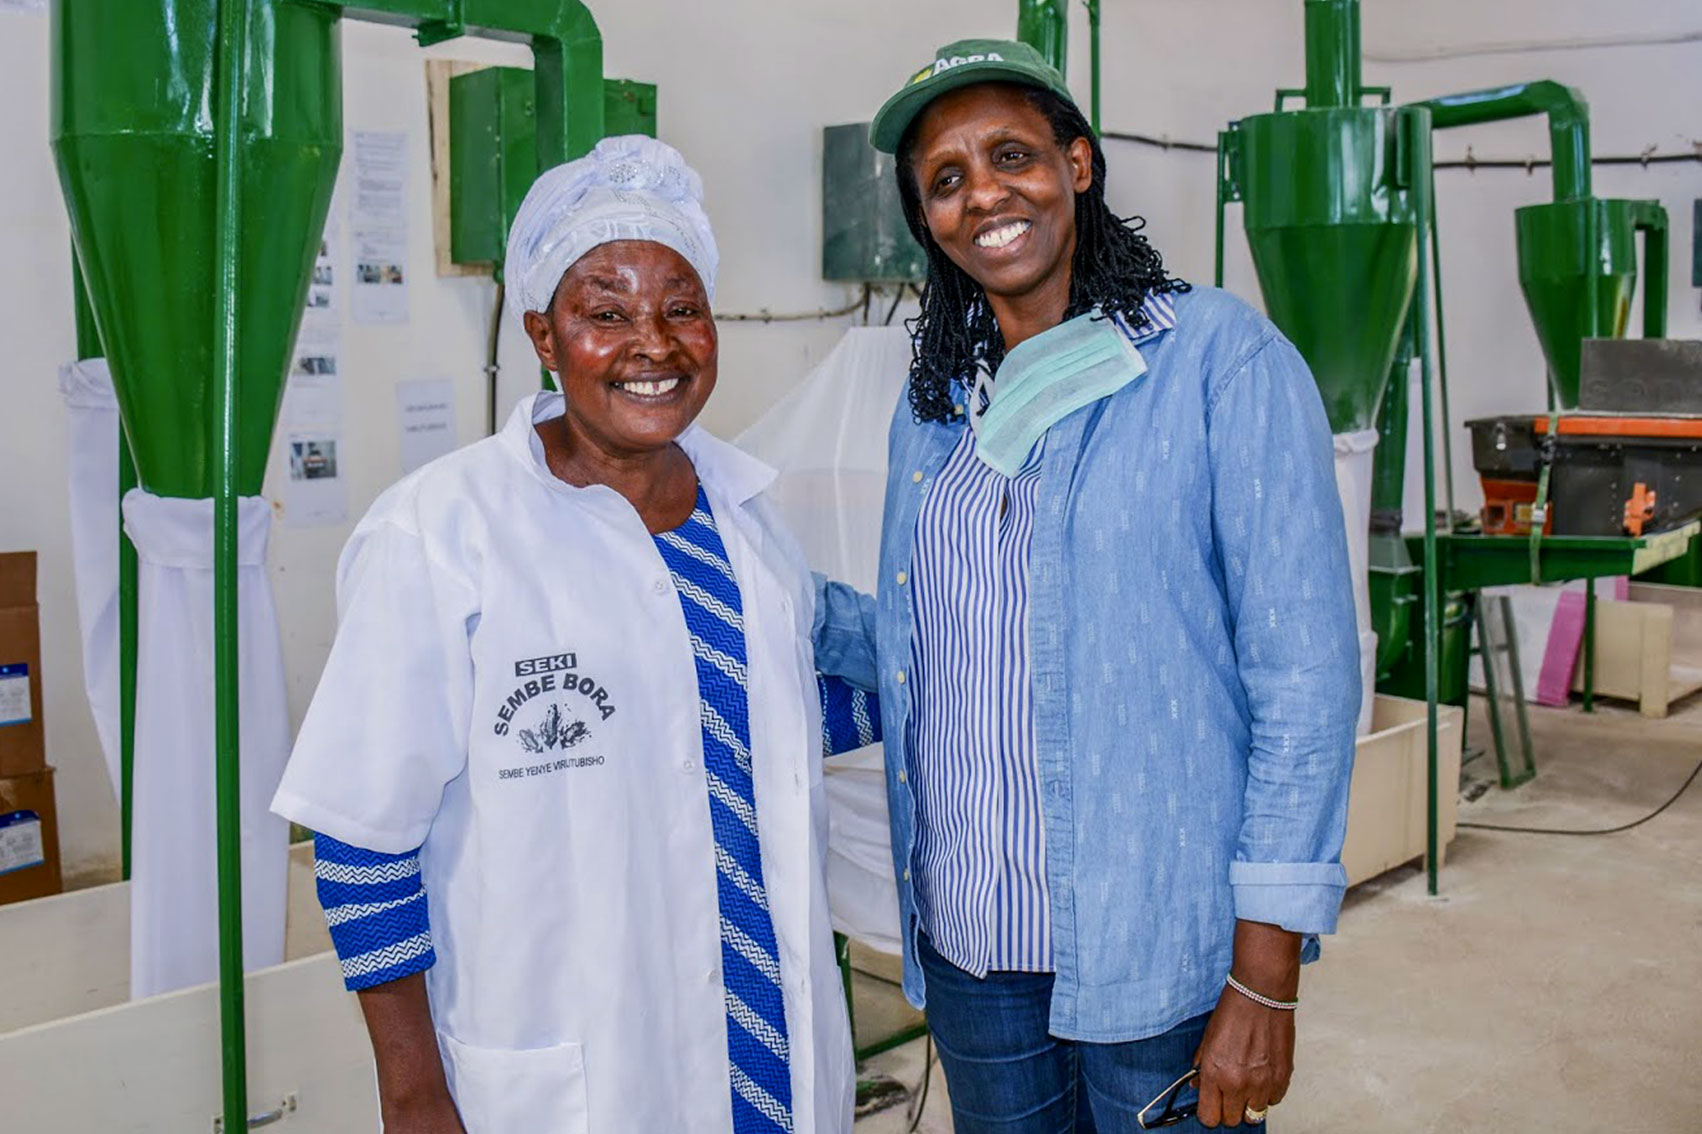 Dr. Kalibata poses for a photo with a female worker in an milling plant.